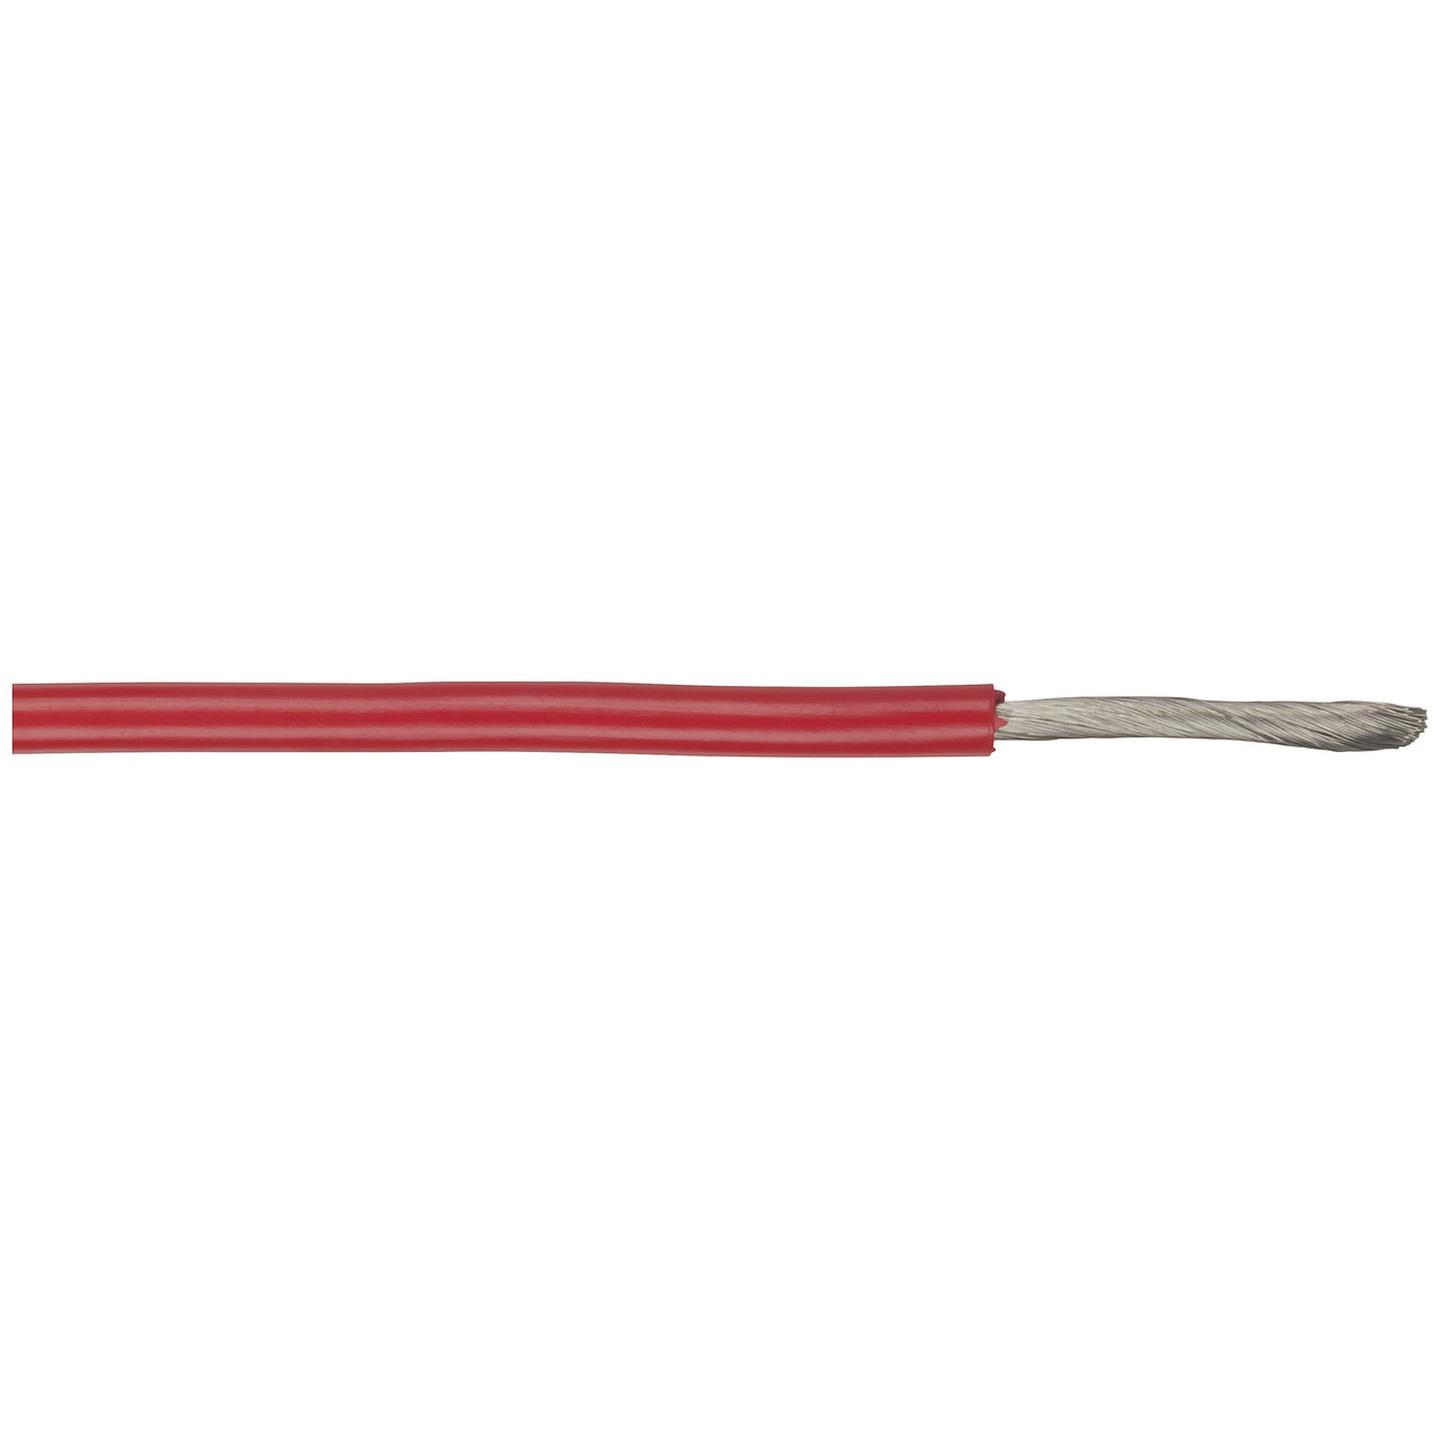 Red 25A Automotive DC Power Cable